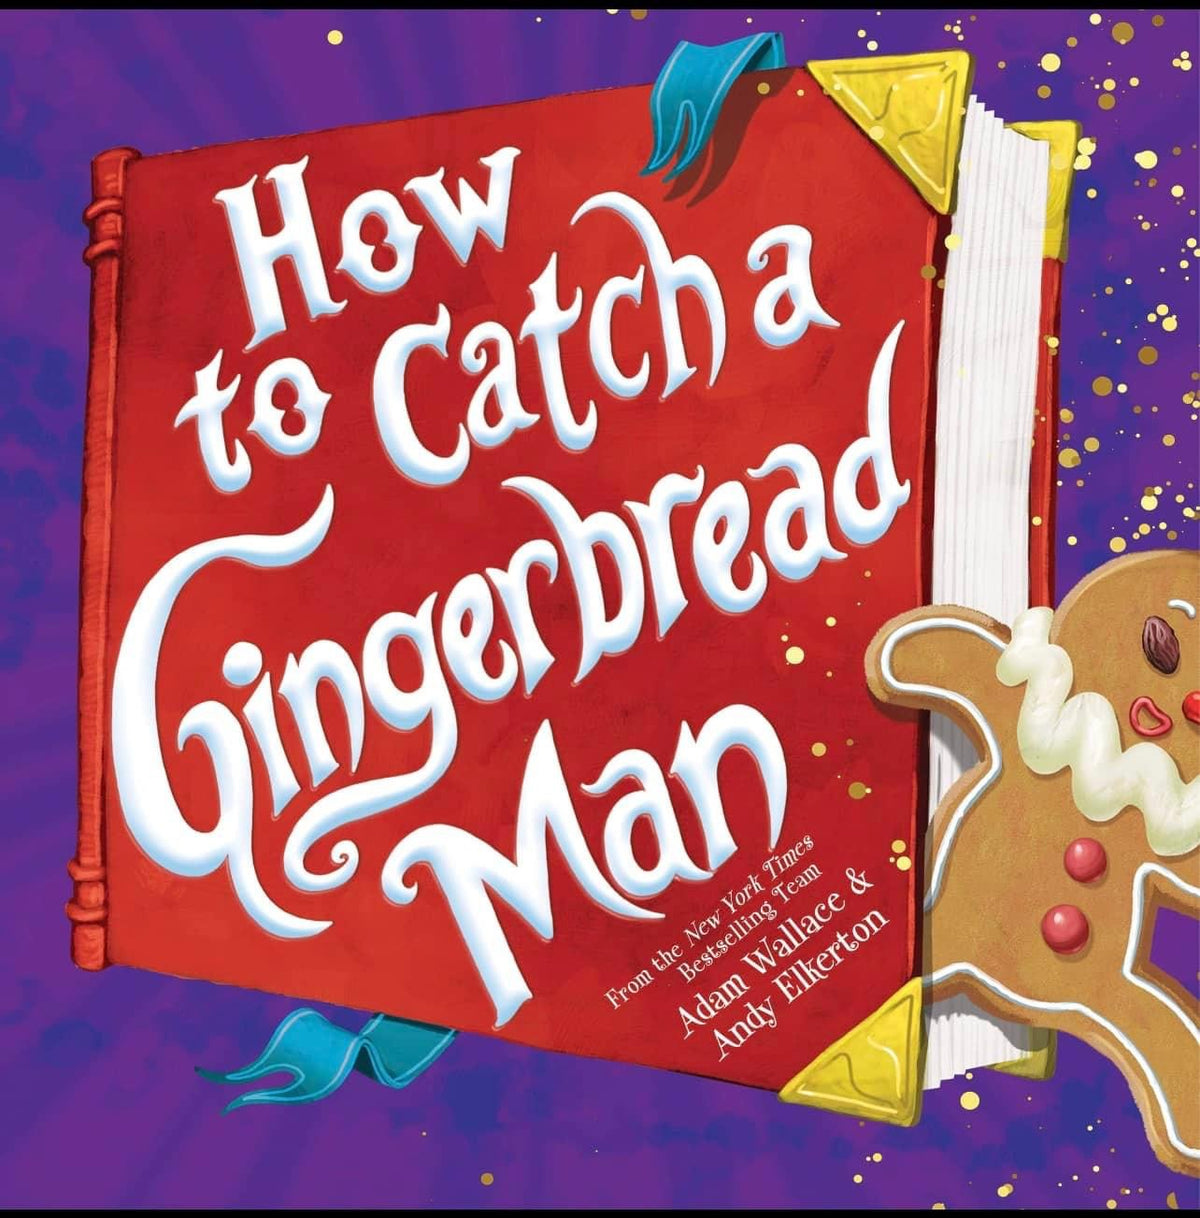 How to Catch a Gingerbread*